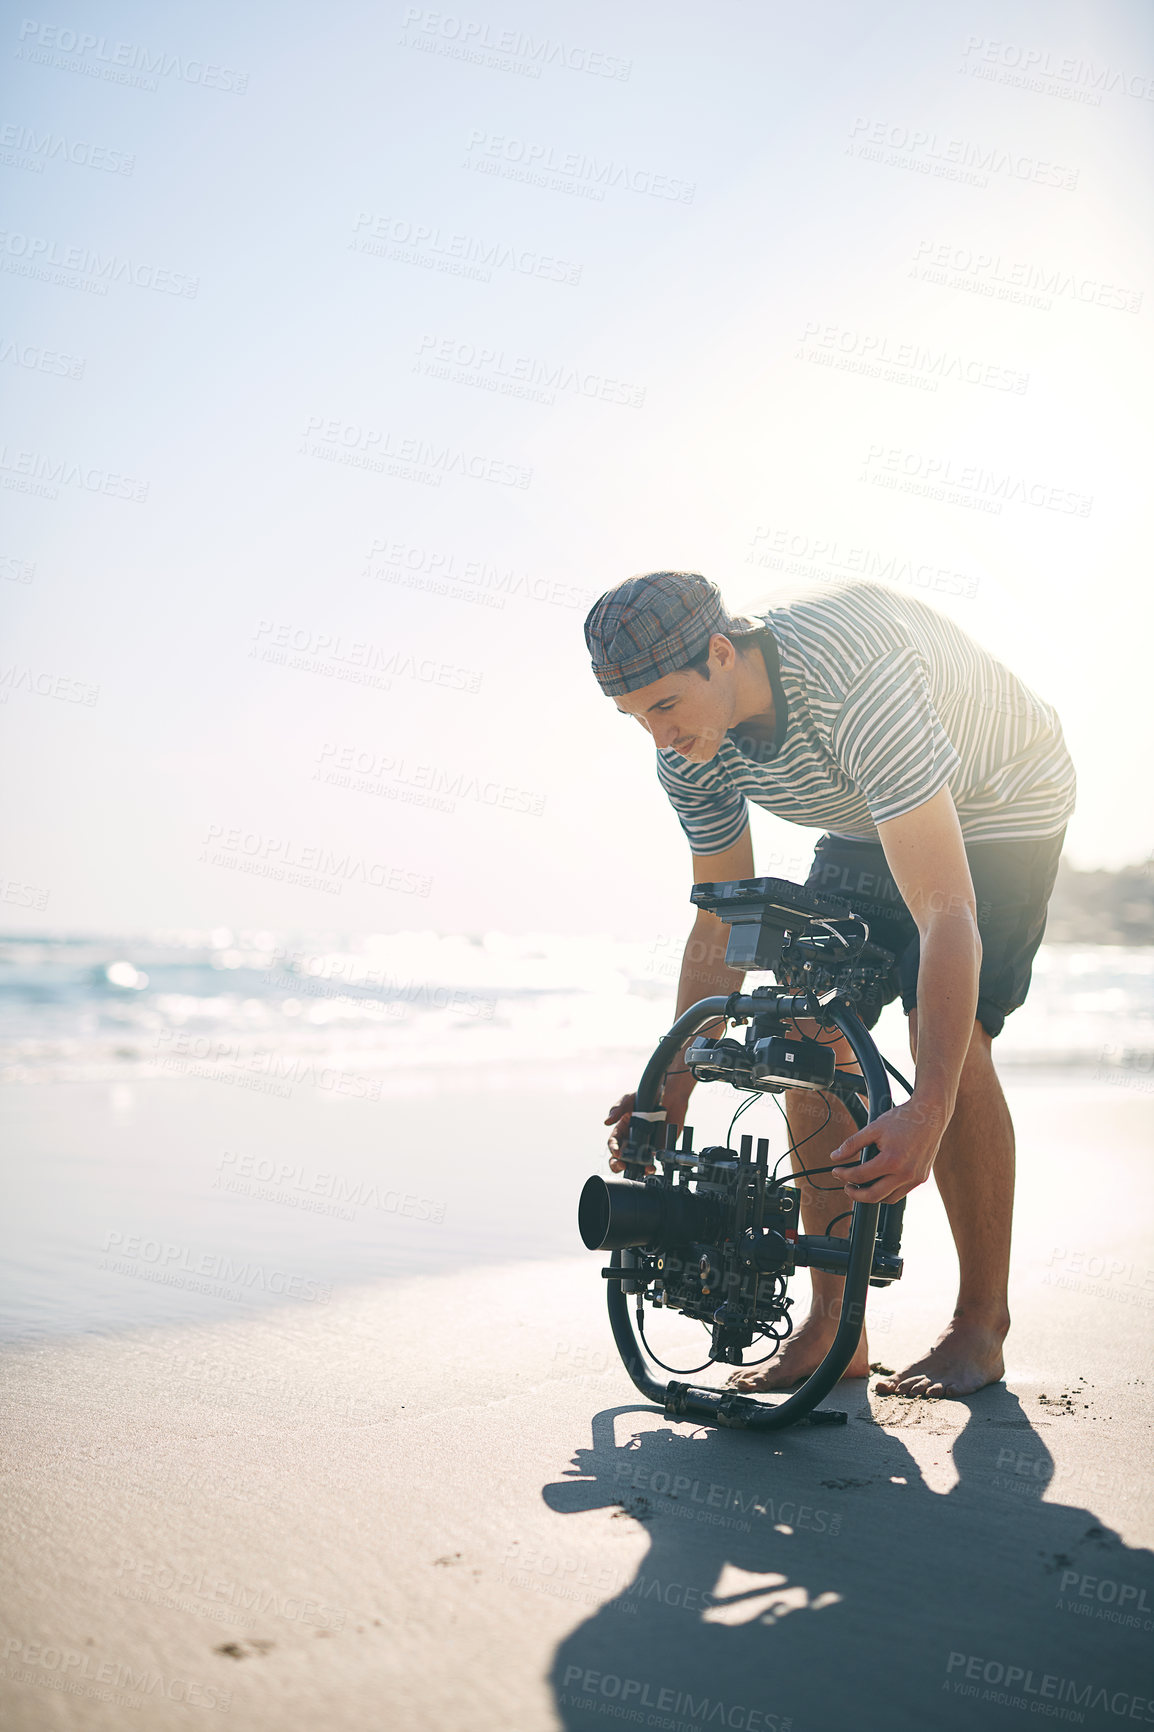 Buy stock photo Shot of a focused young man making a few adjustments on a state of the art video camera on a beach during the day